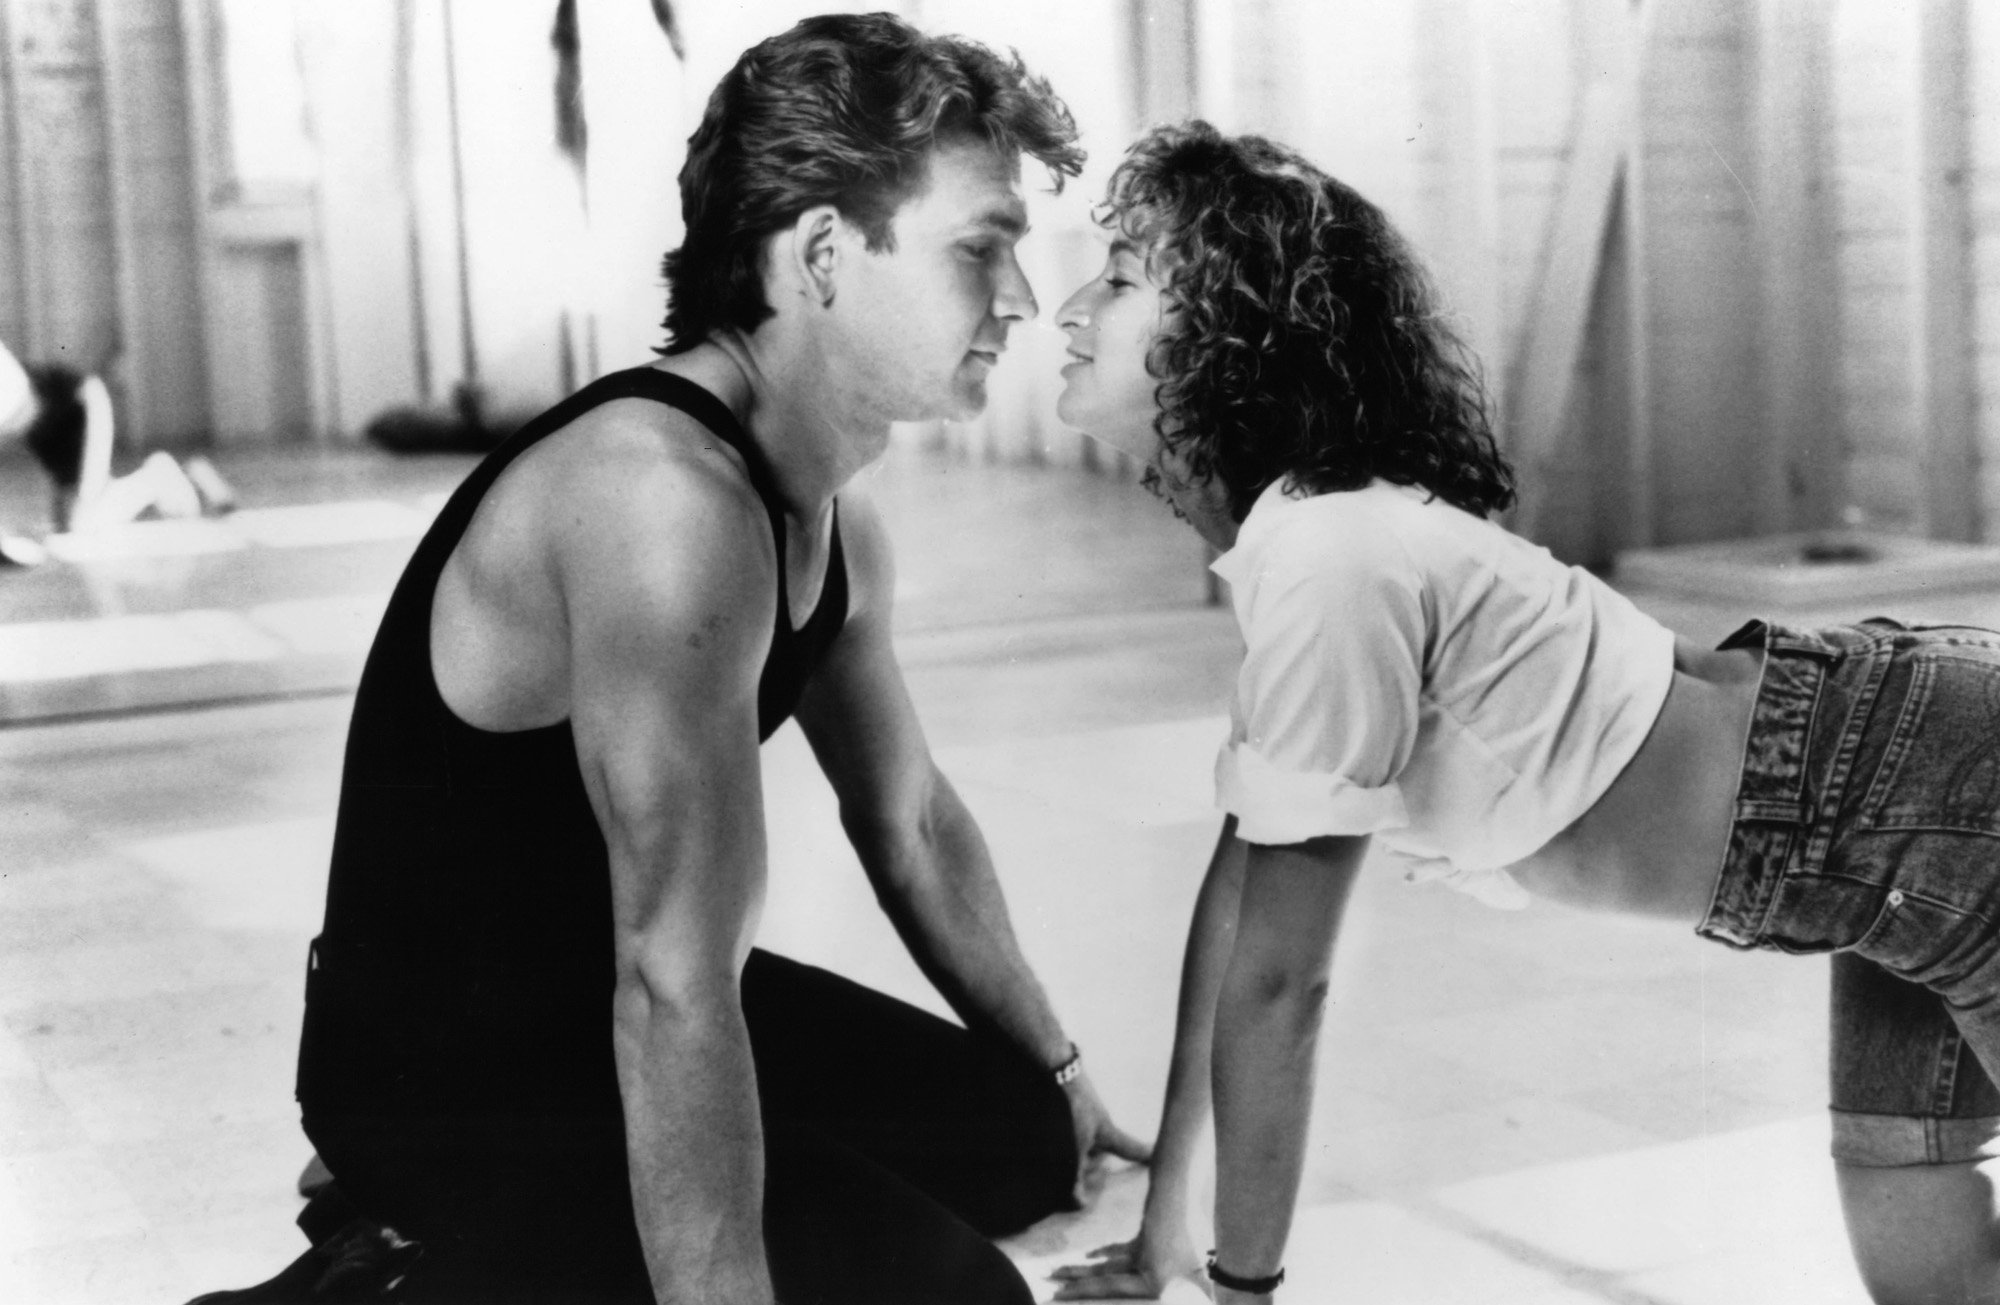 Patrick Swayze and Jennifer Grey in a scene from the film 'Dirty Dancing'